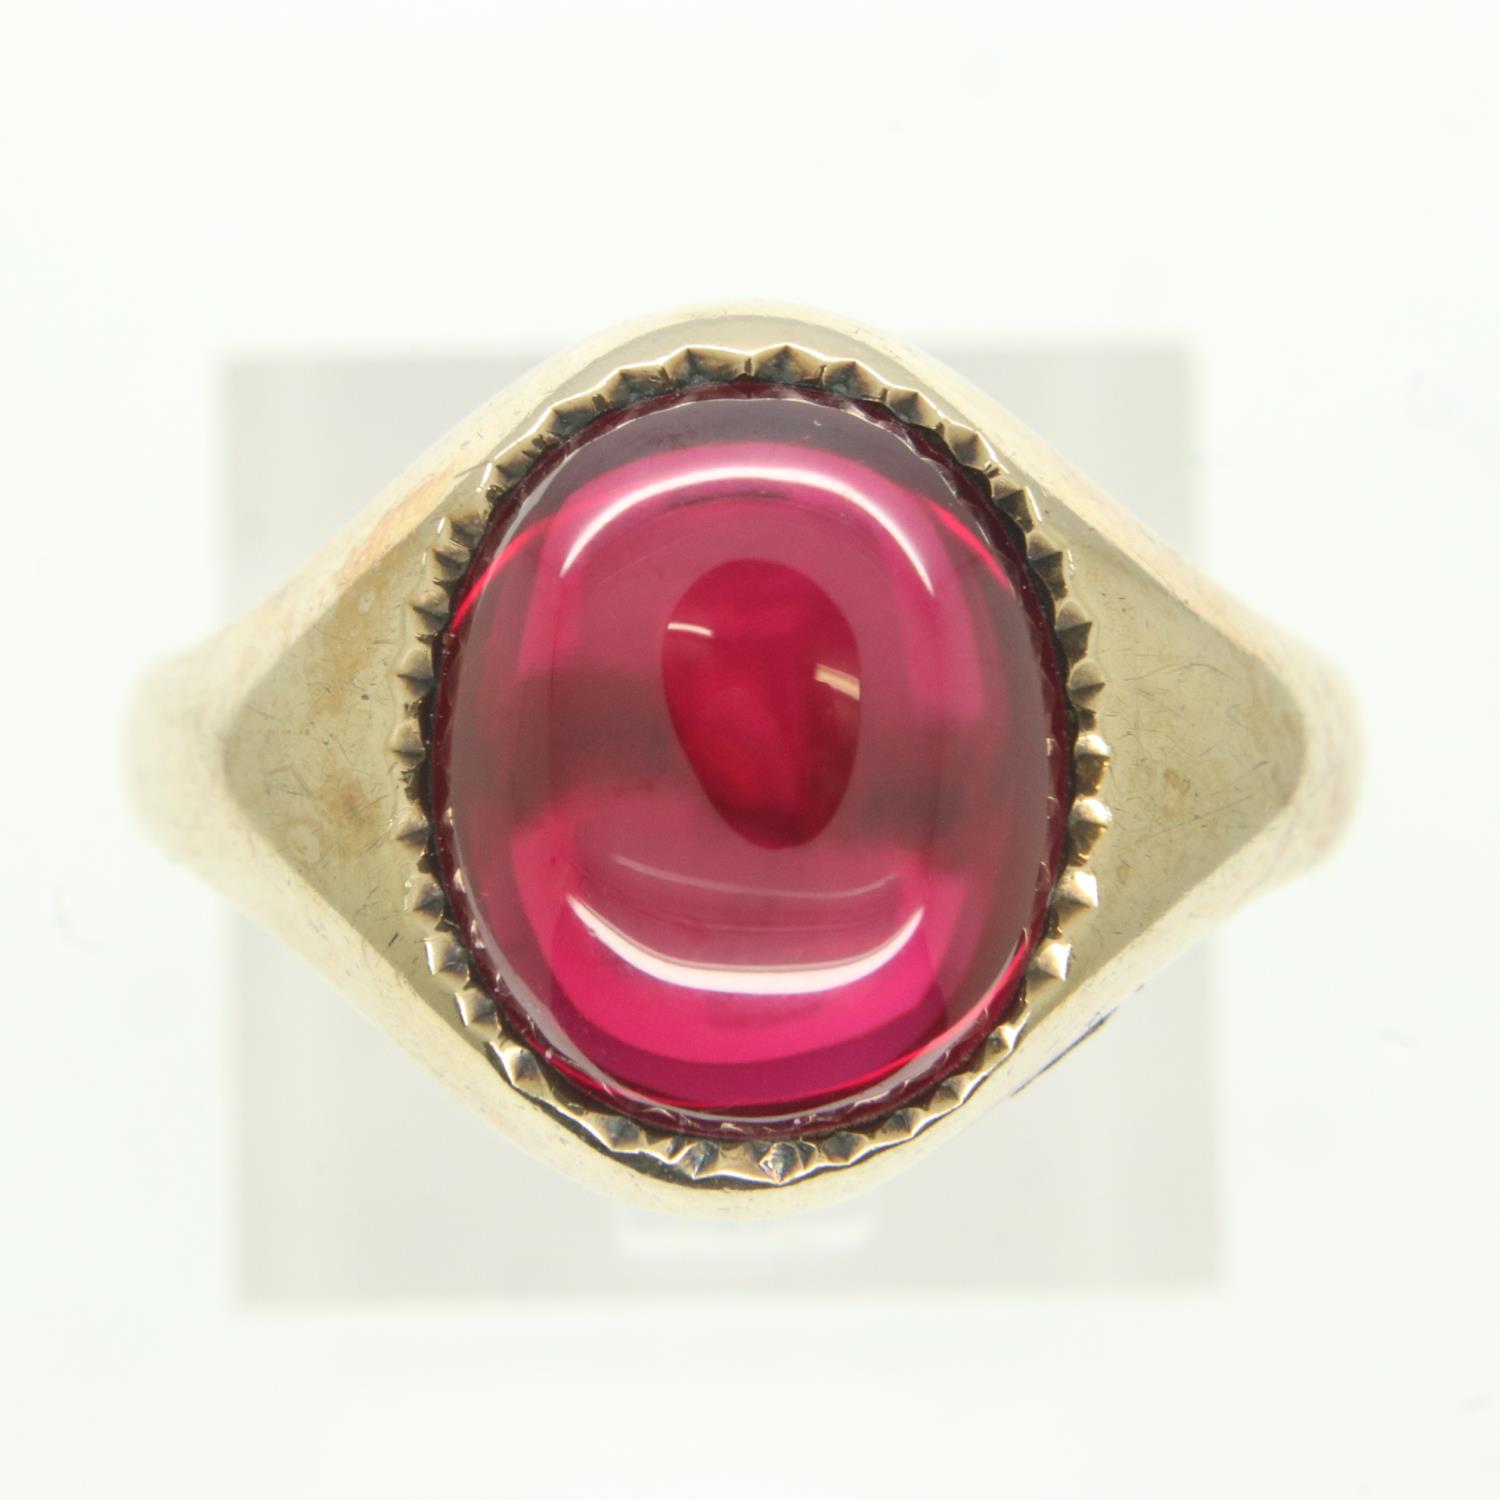 9ct gold signet ring, set with a large cabochon ruby, size S/T, 4.6g. UK P&P Group 0 (£6+VAT for the